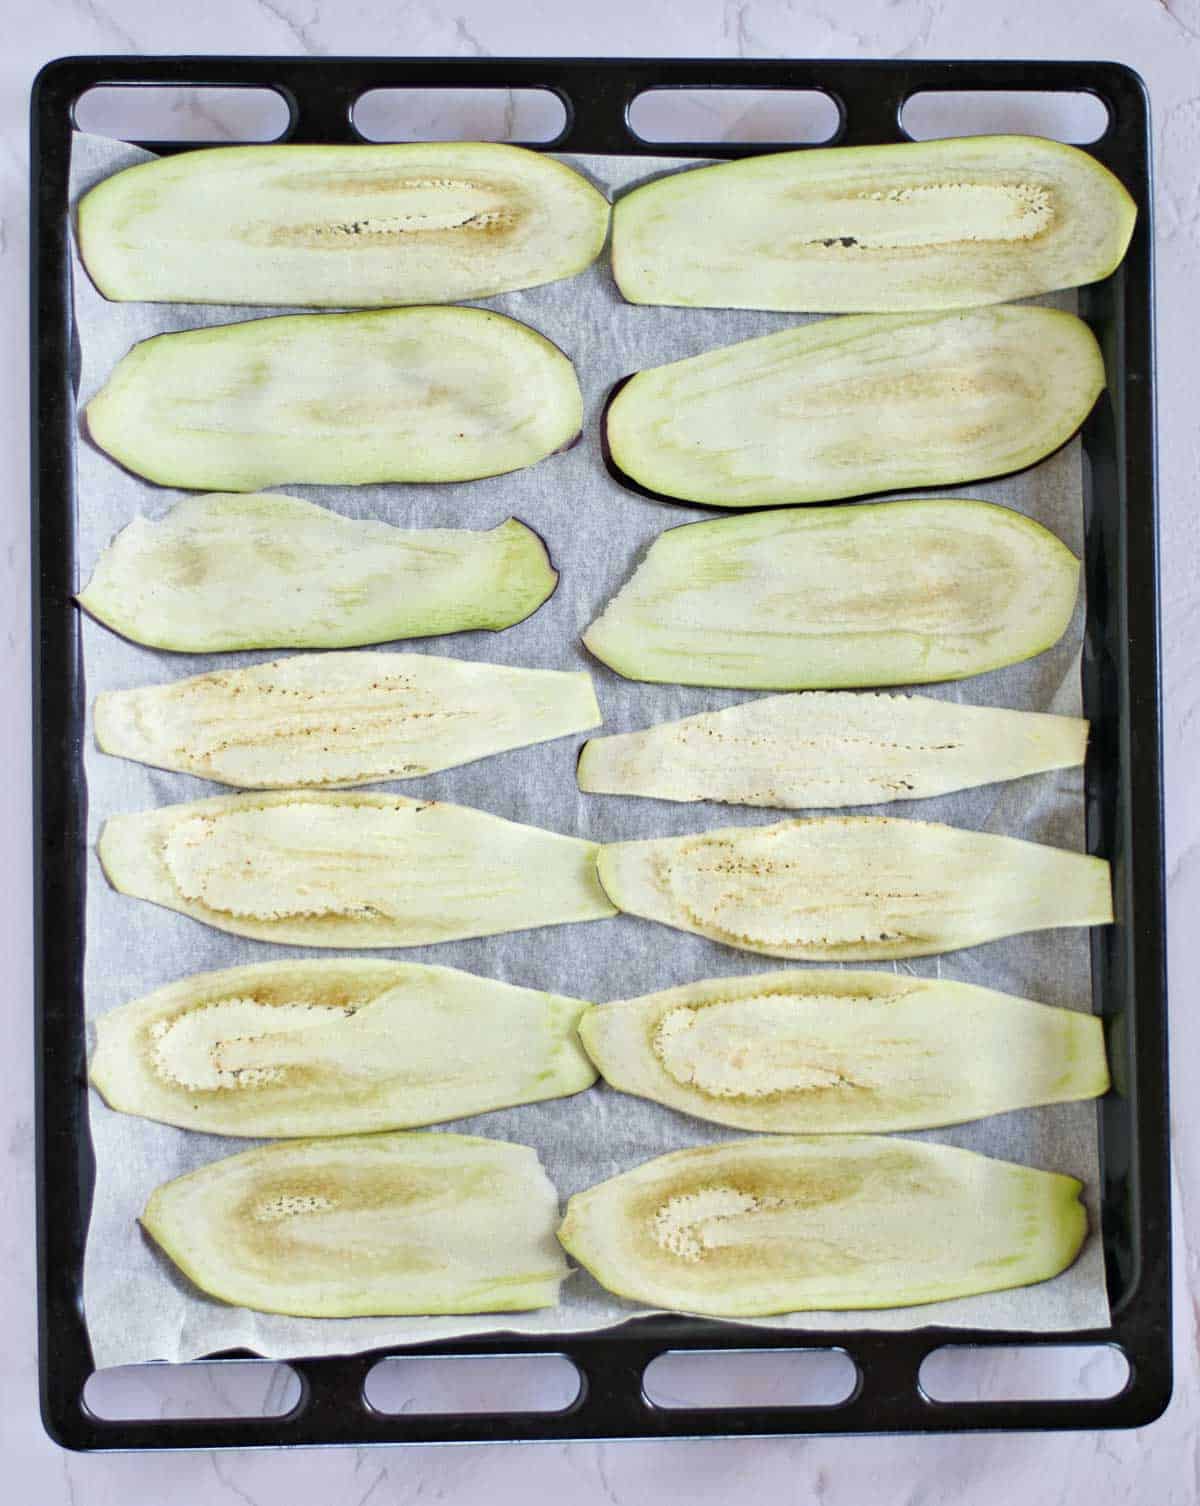 Thinly sliced eggplant on a baking sheet